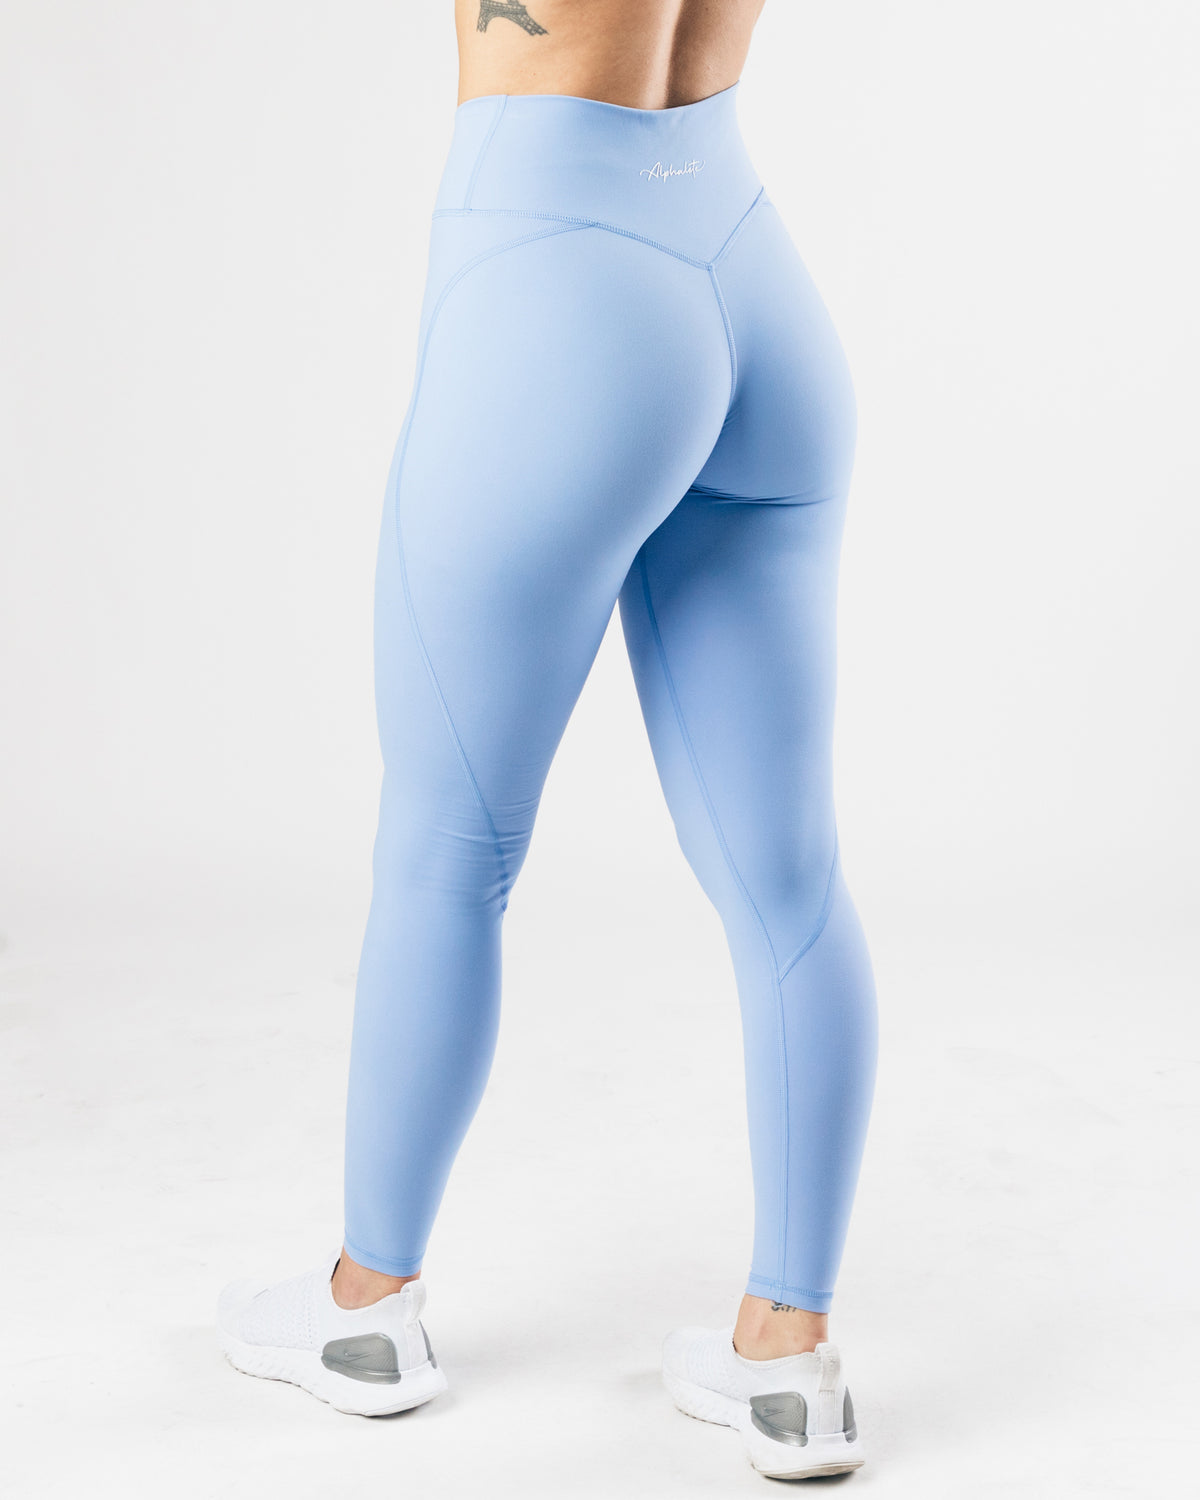 Alphalete Surface Power Leggings Review  International Society of  Precision Agriculture